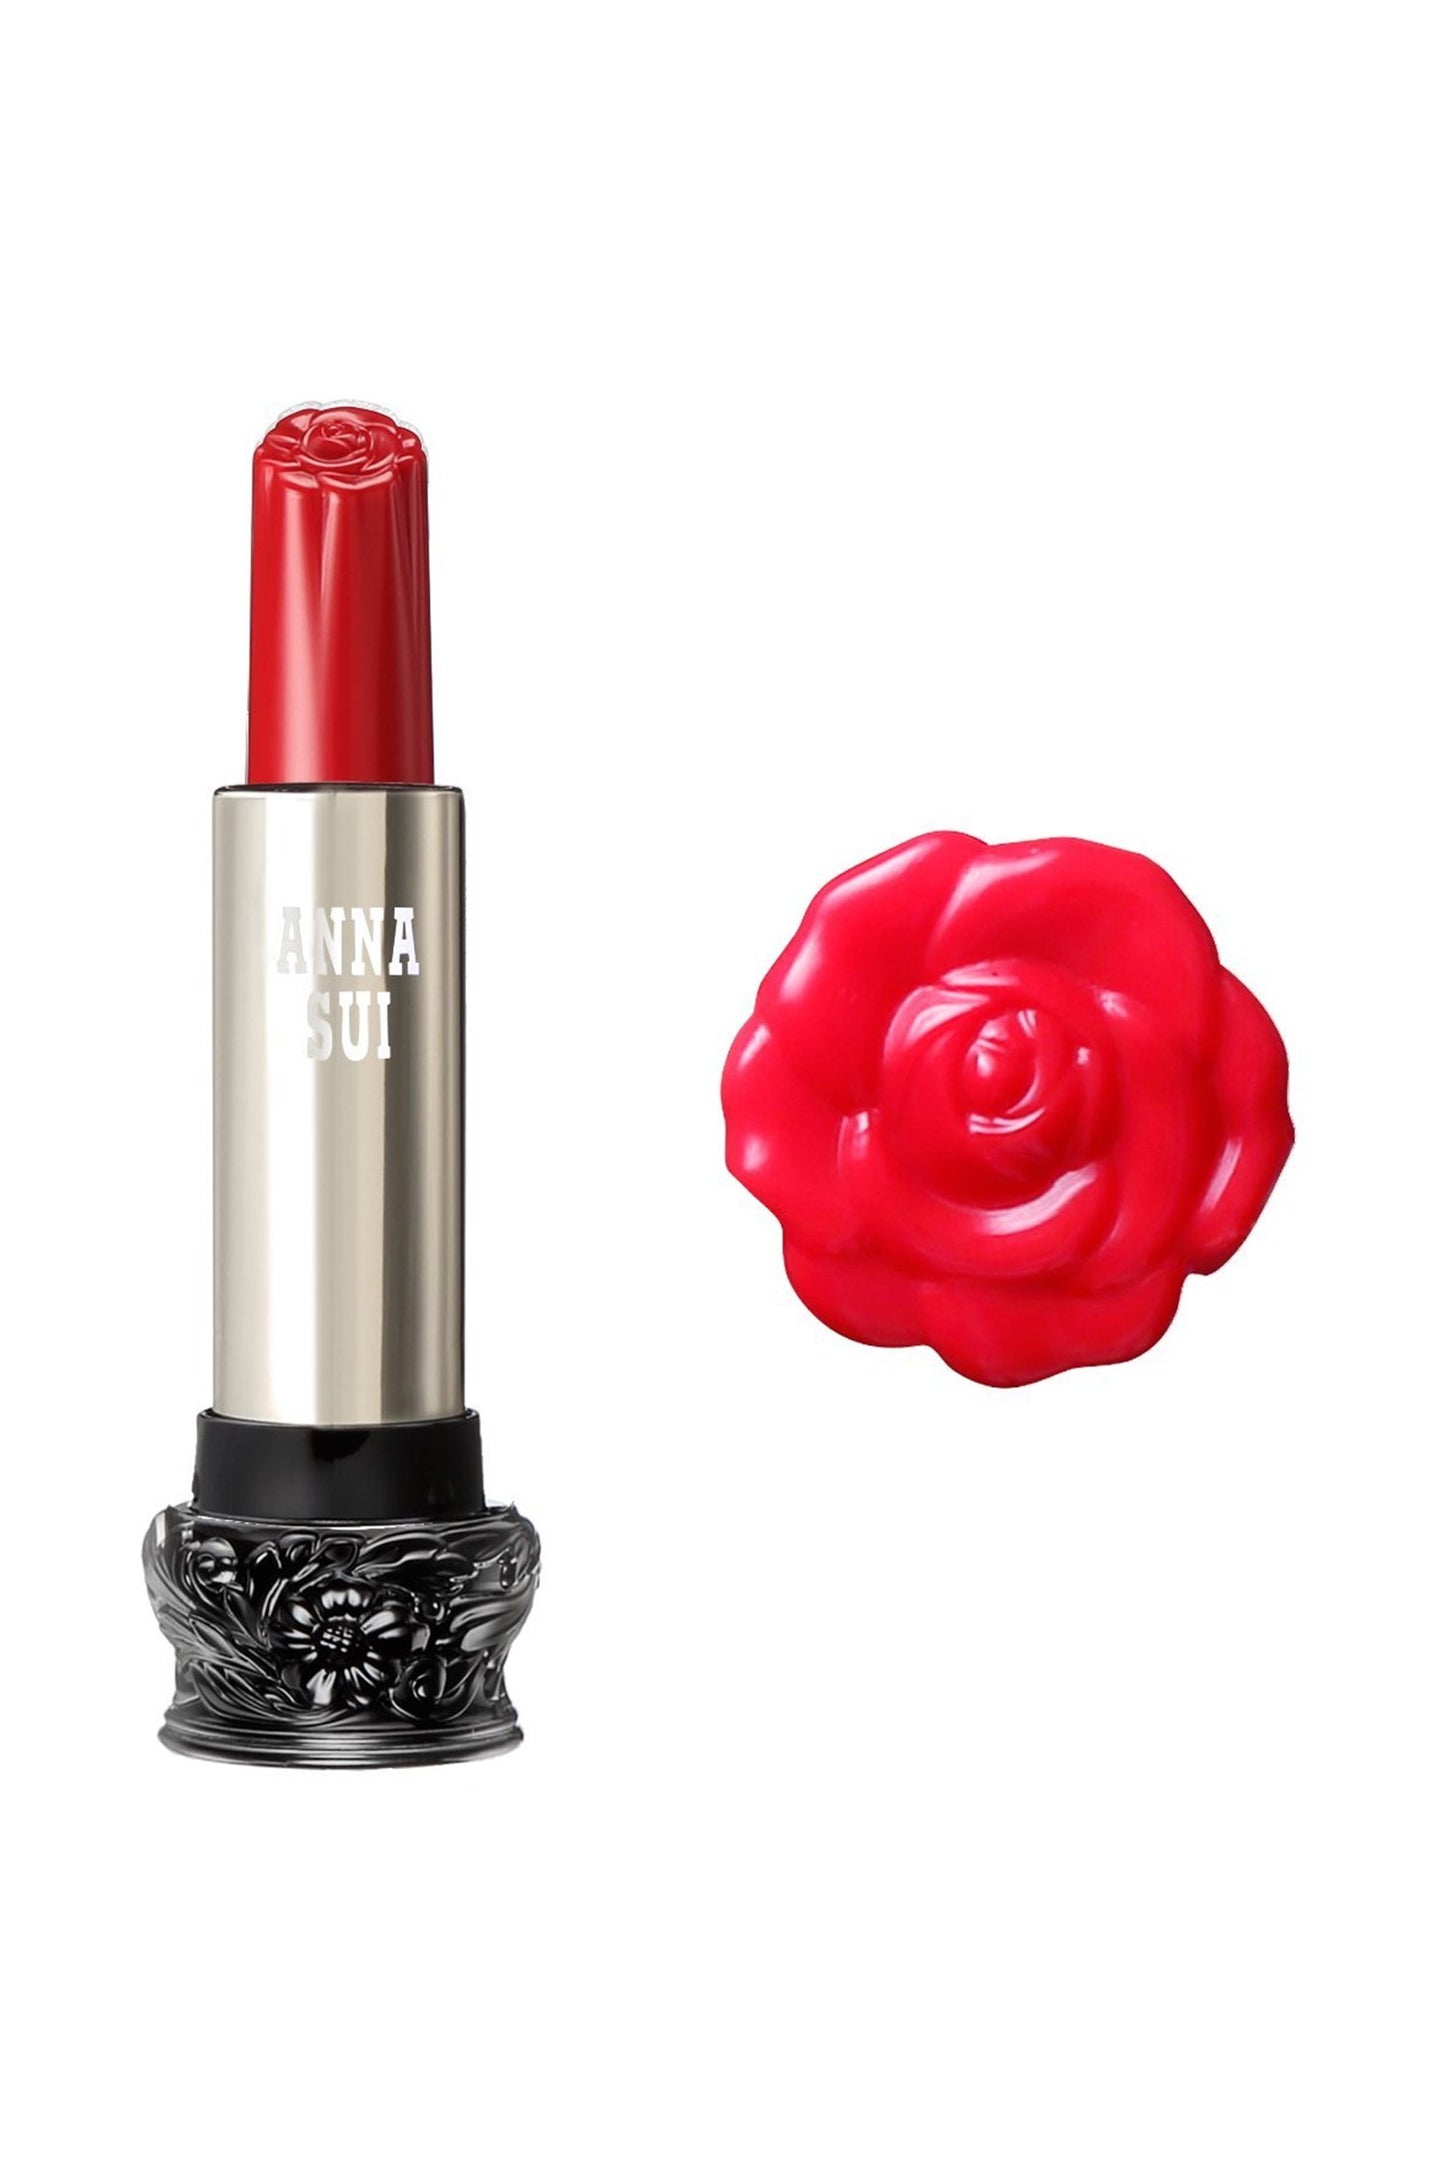 400-Clear Red Poppy Lipstick S: Sheer Flower, cylindrical, large black base, engraved floral design, metallic body 